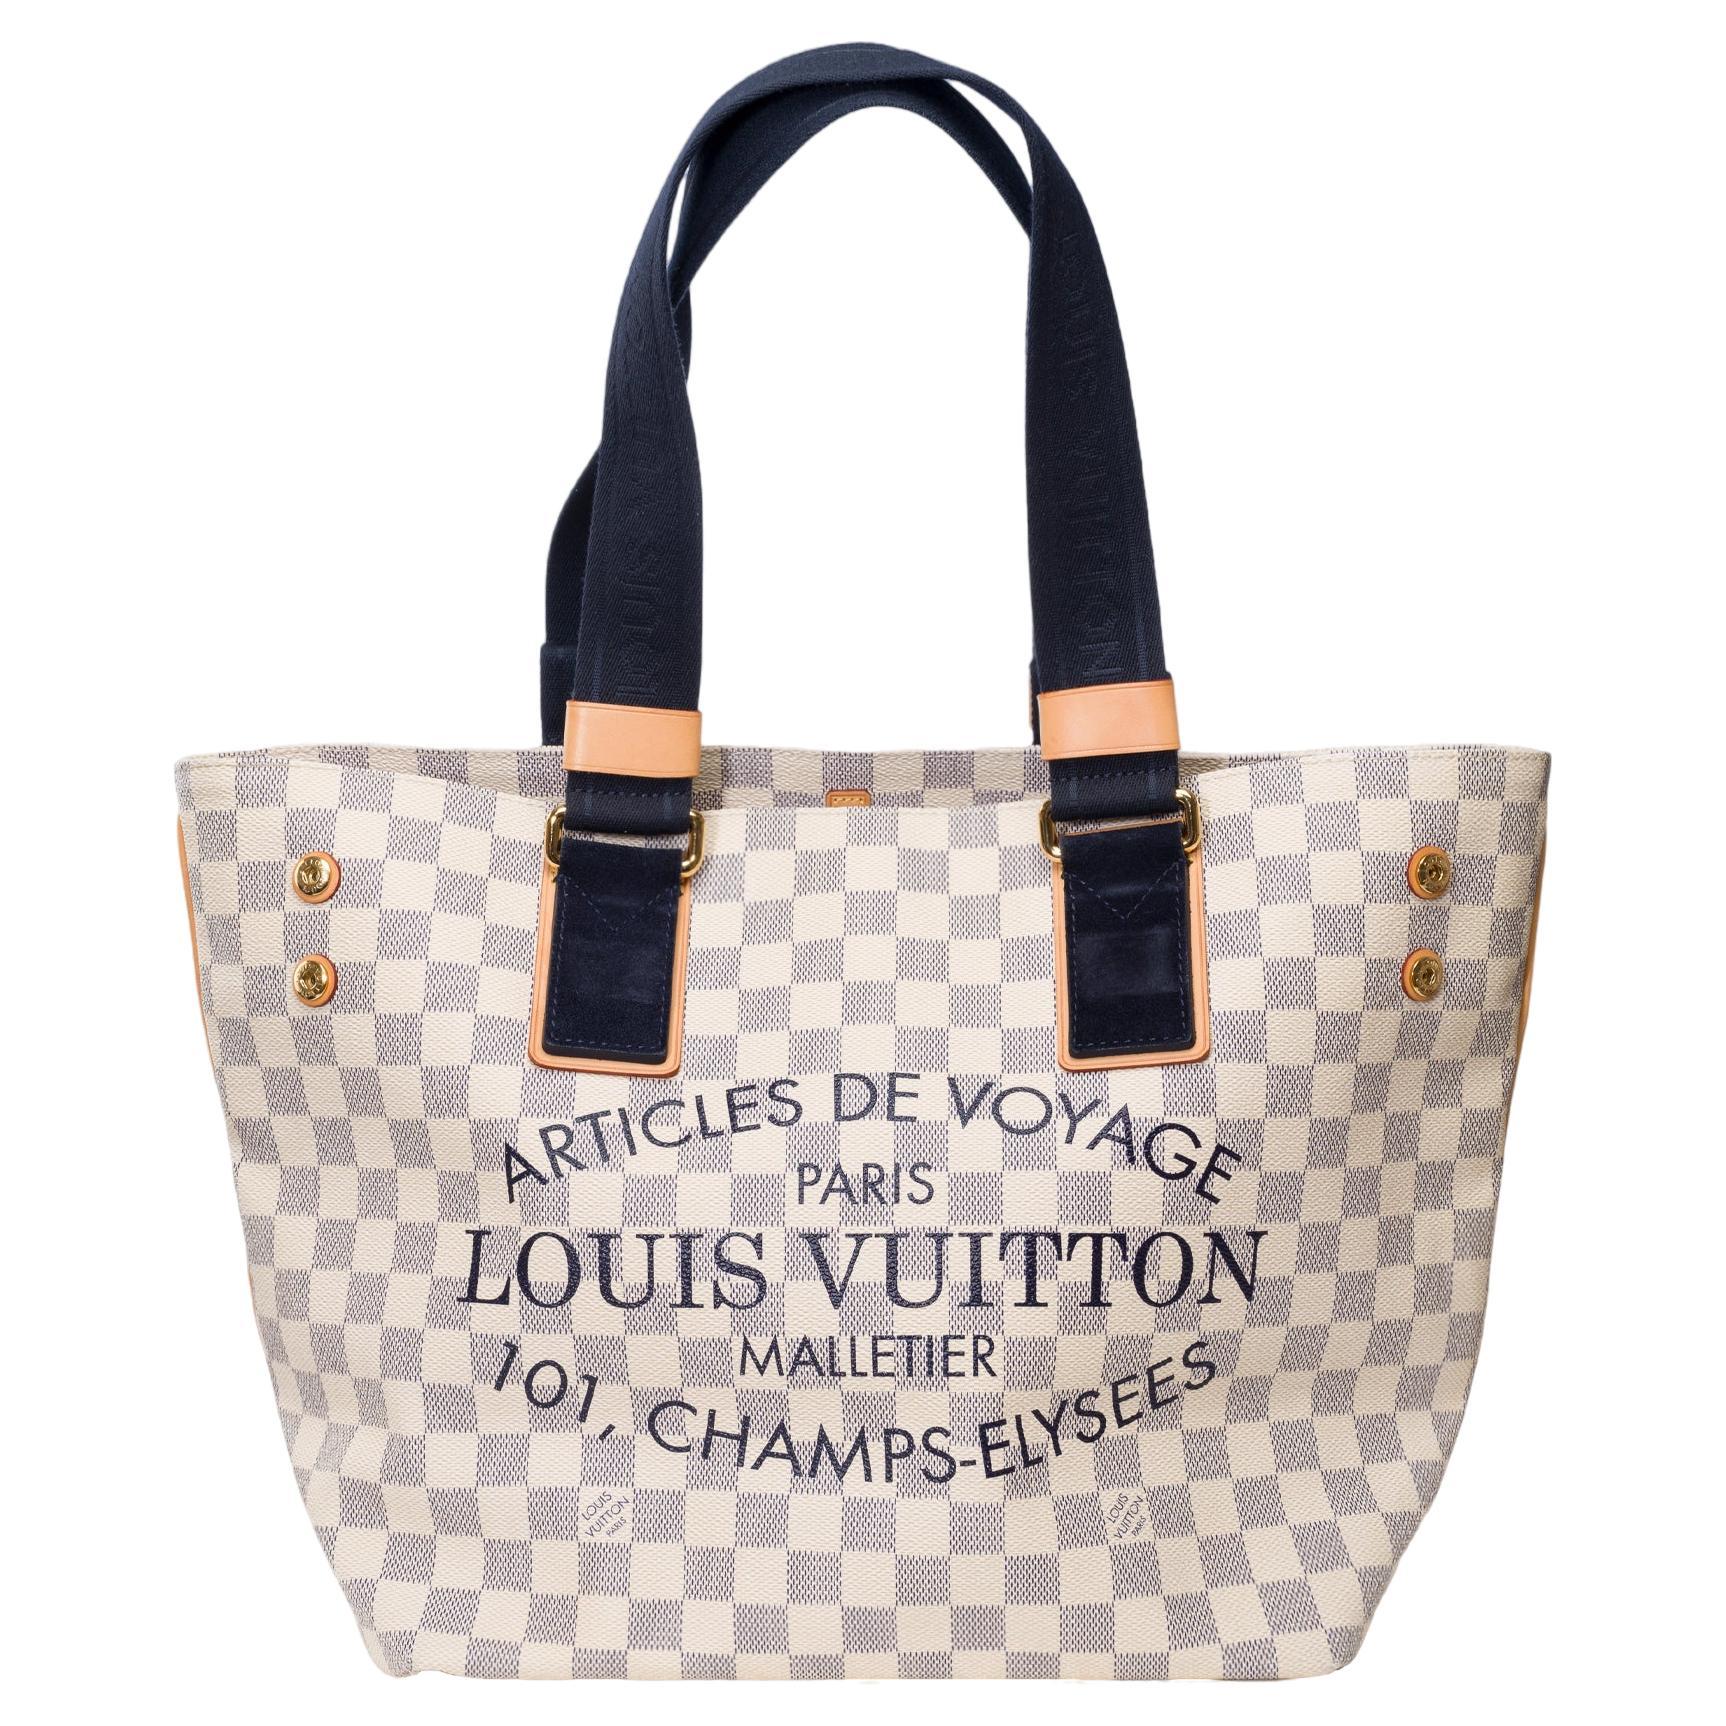 Amazing Louis Vuitton Tote bag in azur checkered canvas, GHW For Sale